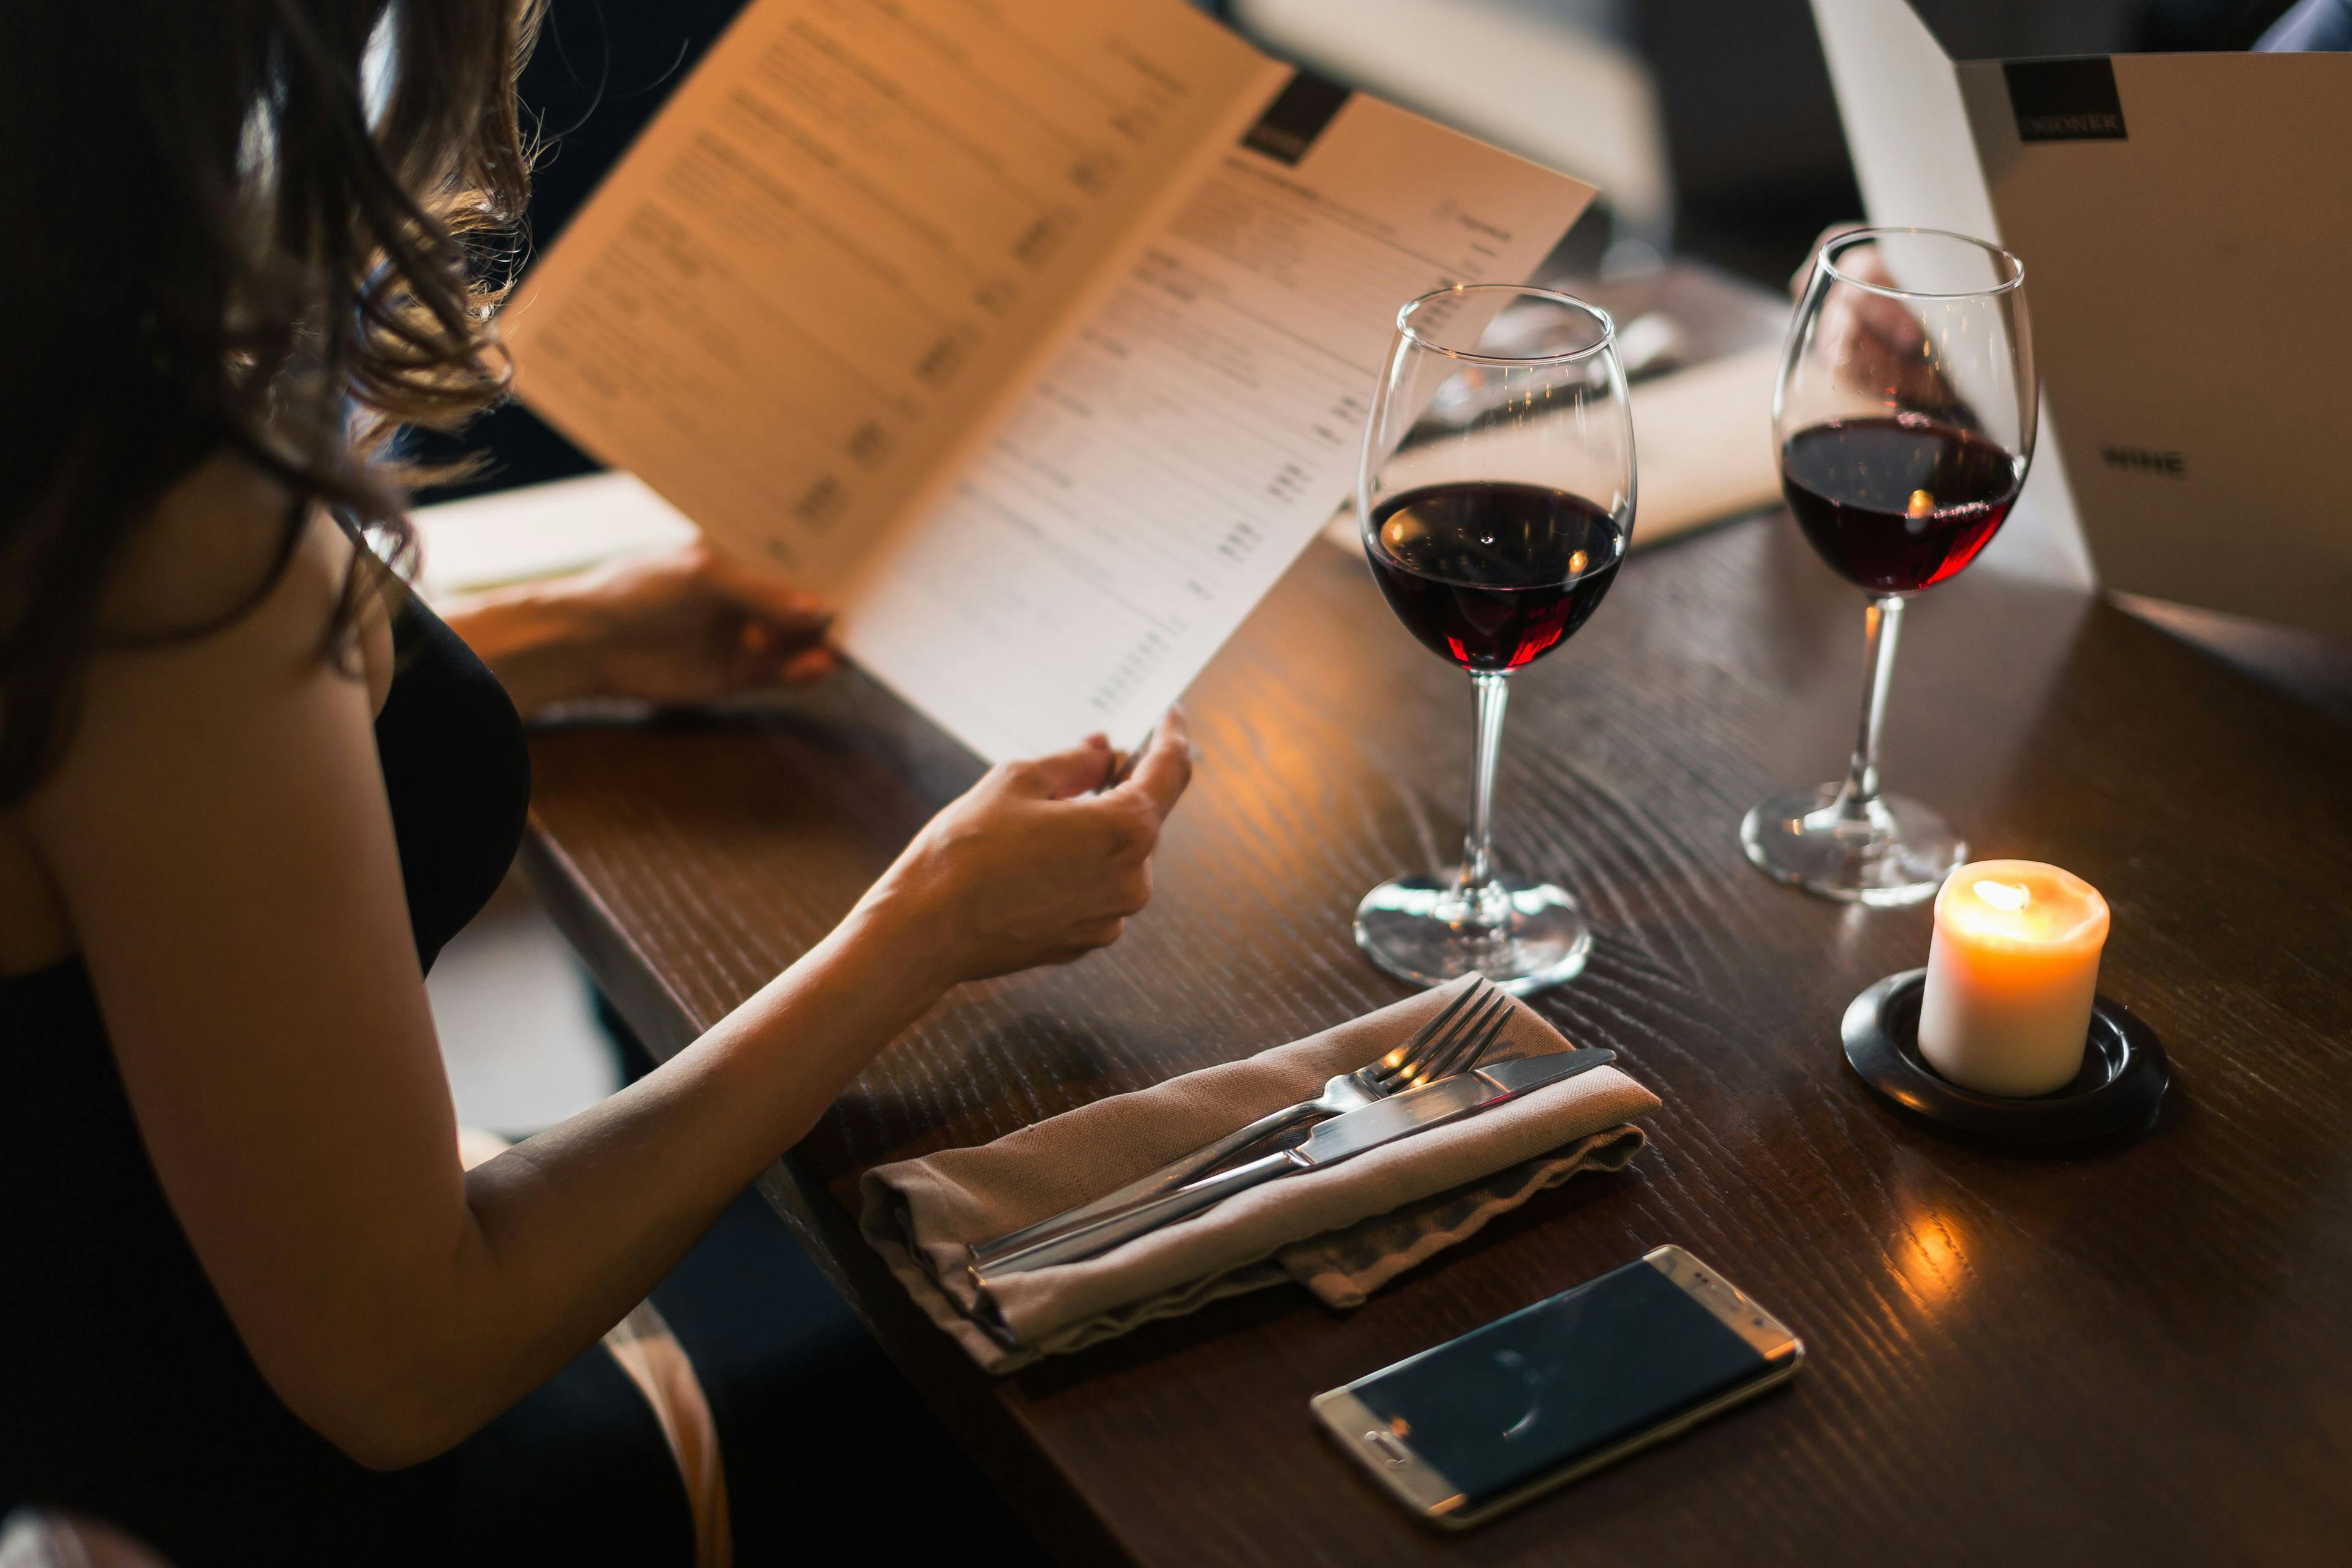 Woman holding a menu and a glass of wine.